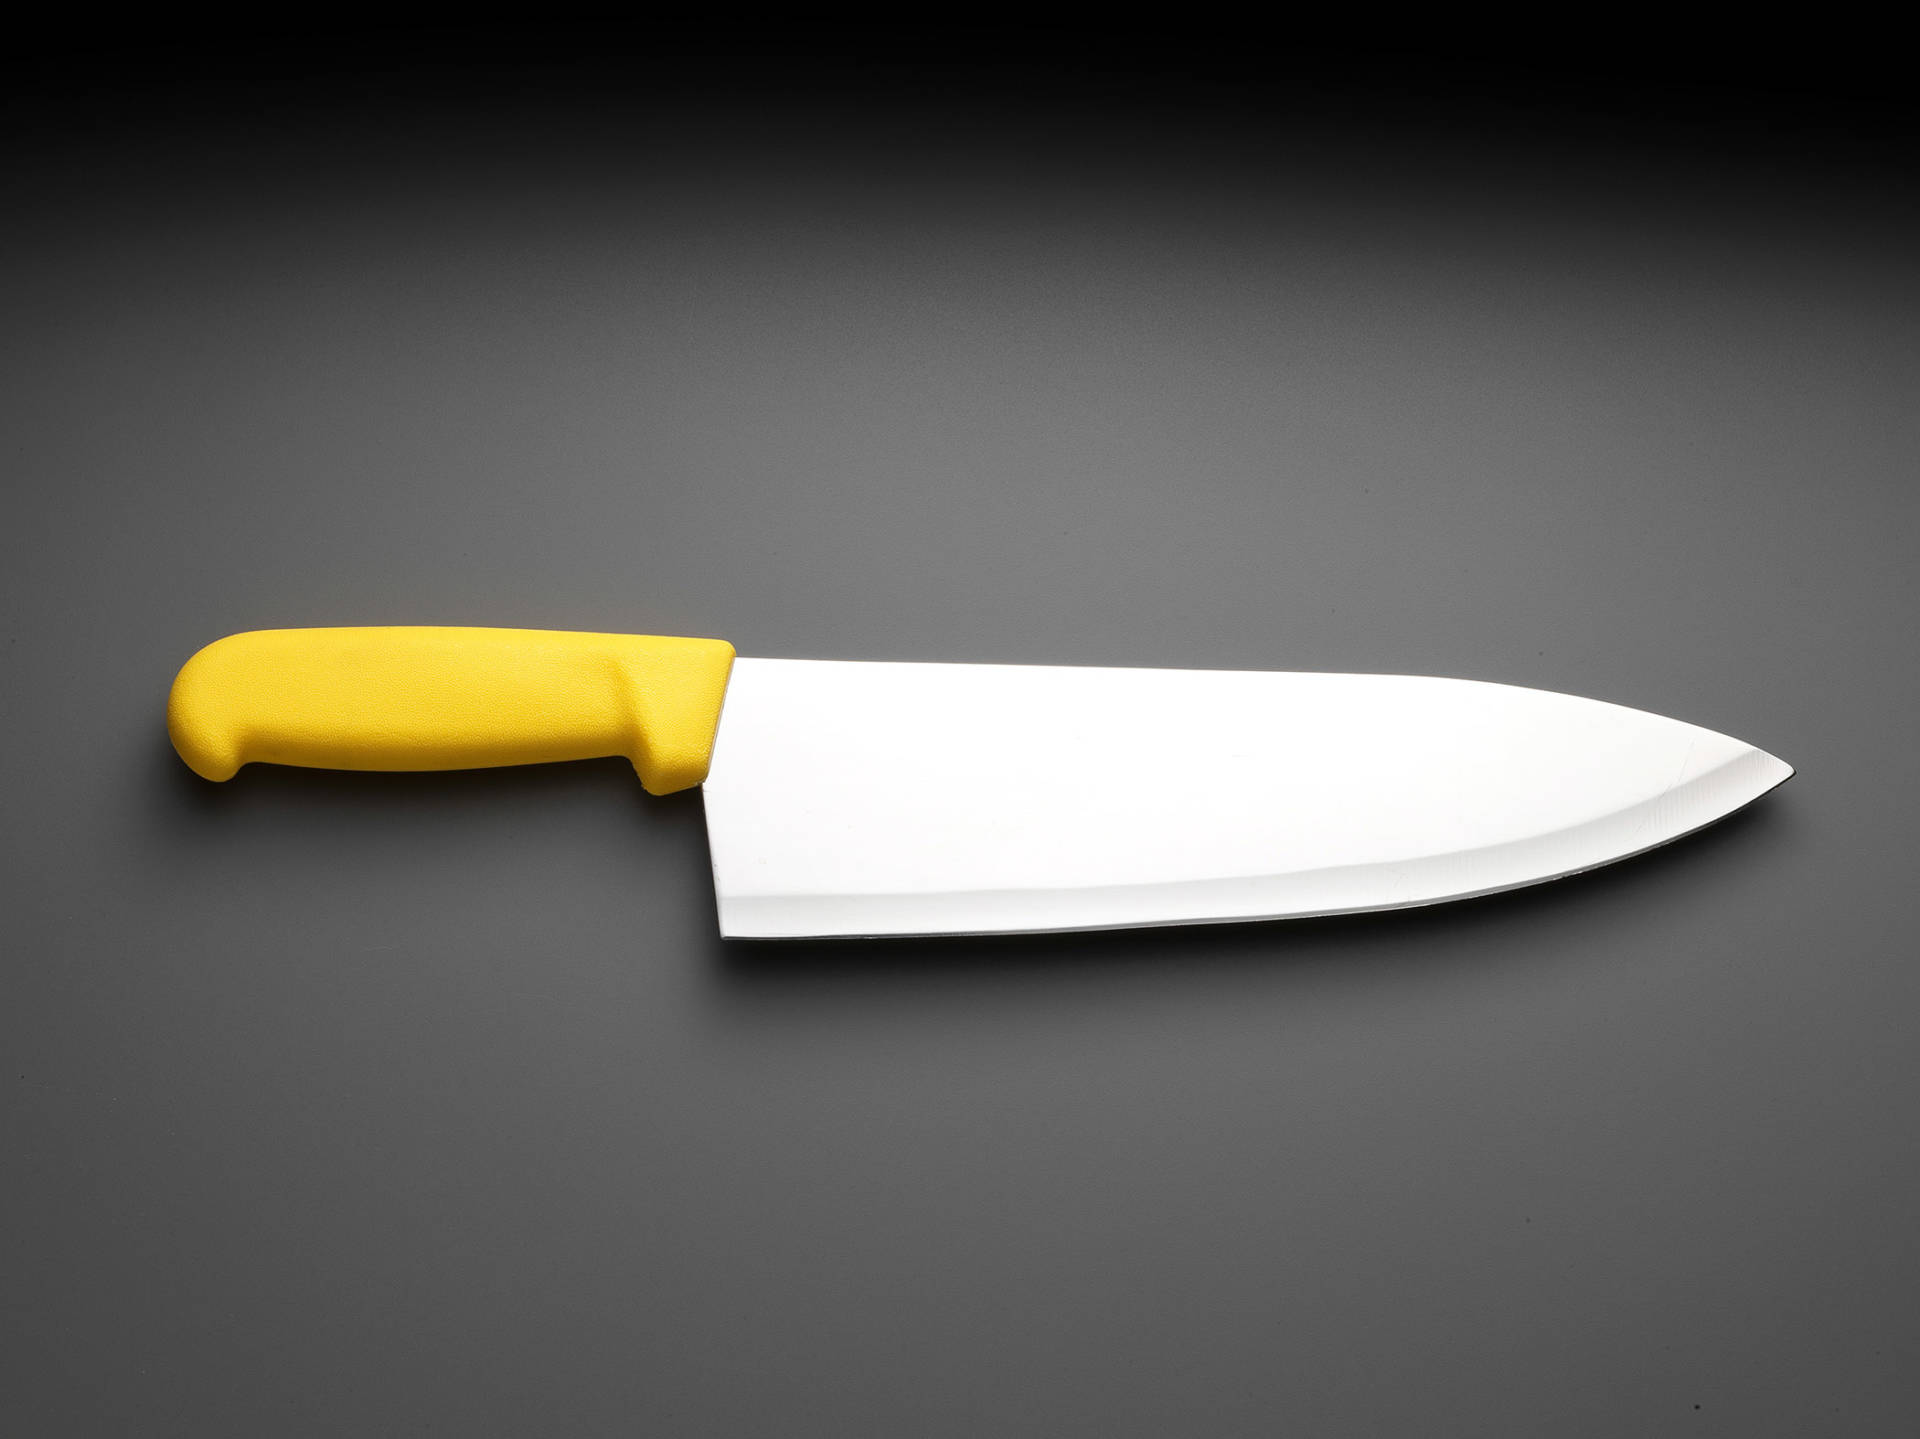 Cook (Chef) Knife in Black, Blue, Green, Red, White or Yellow Cutting Supplies